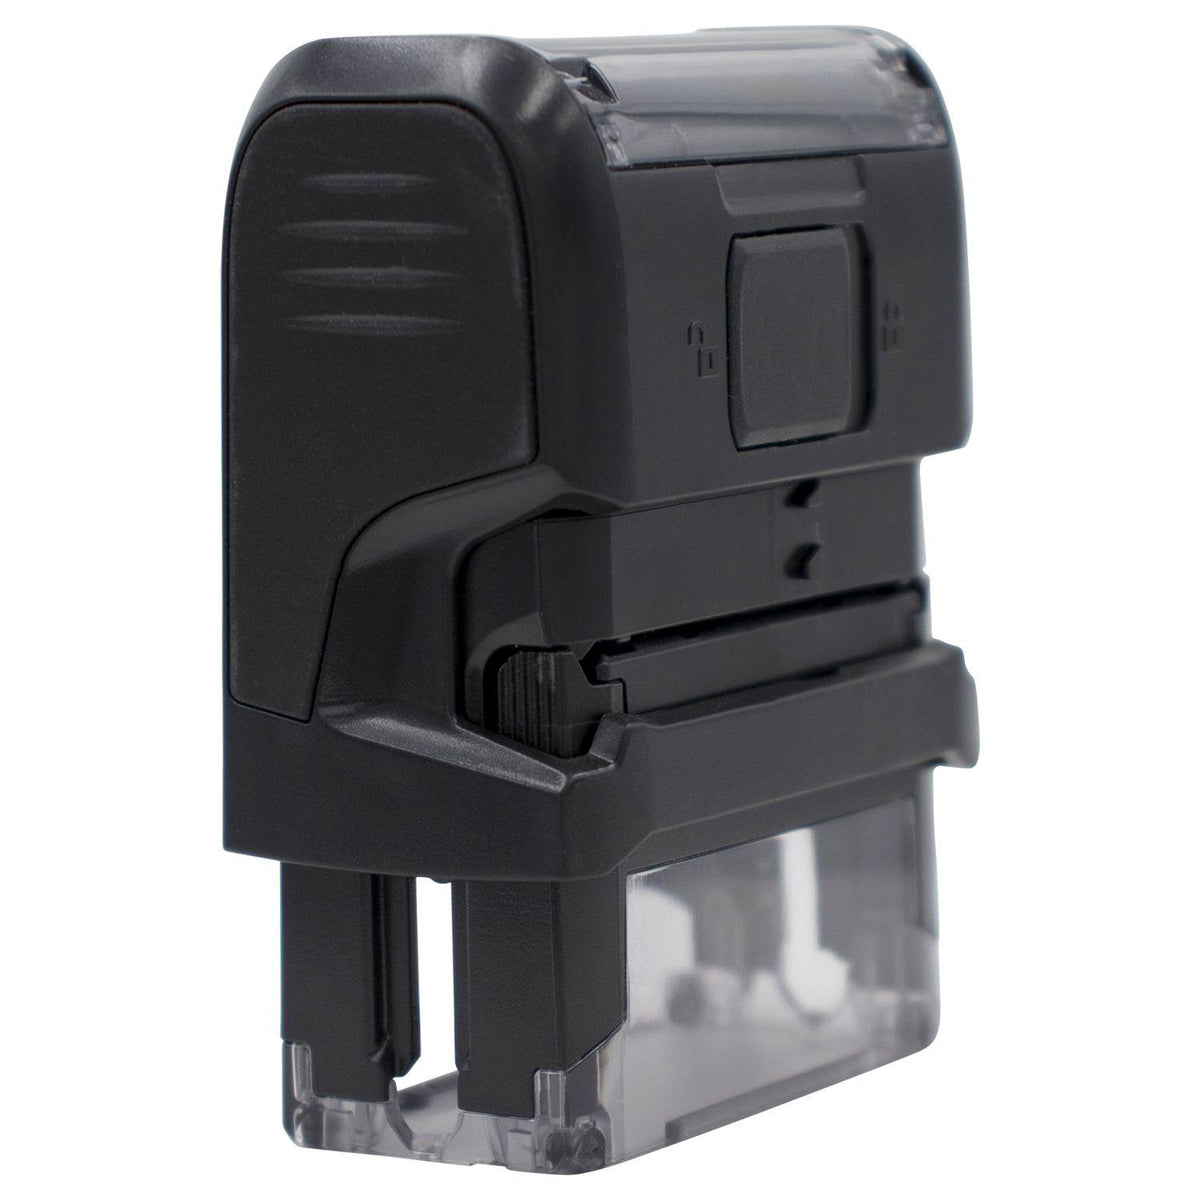 Large Self-Inking Benefits Assigned Stamp Back View